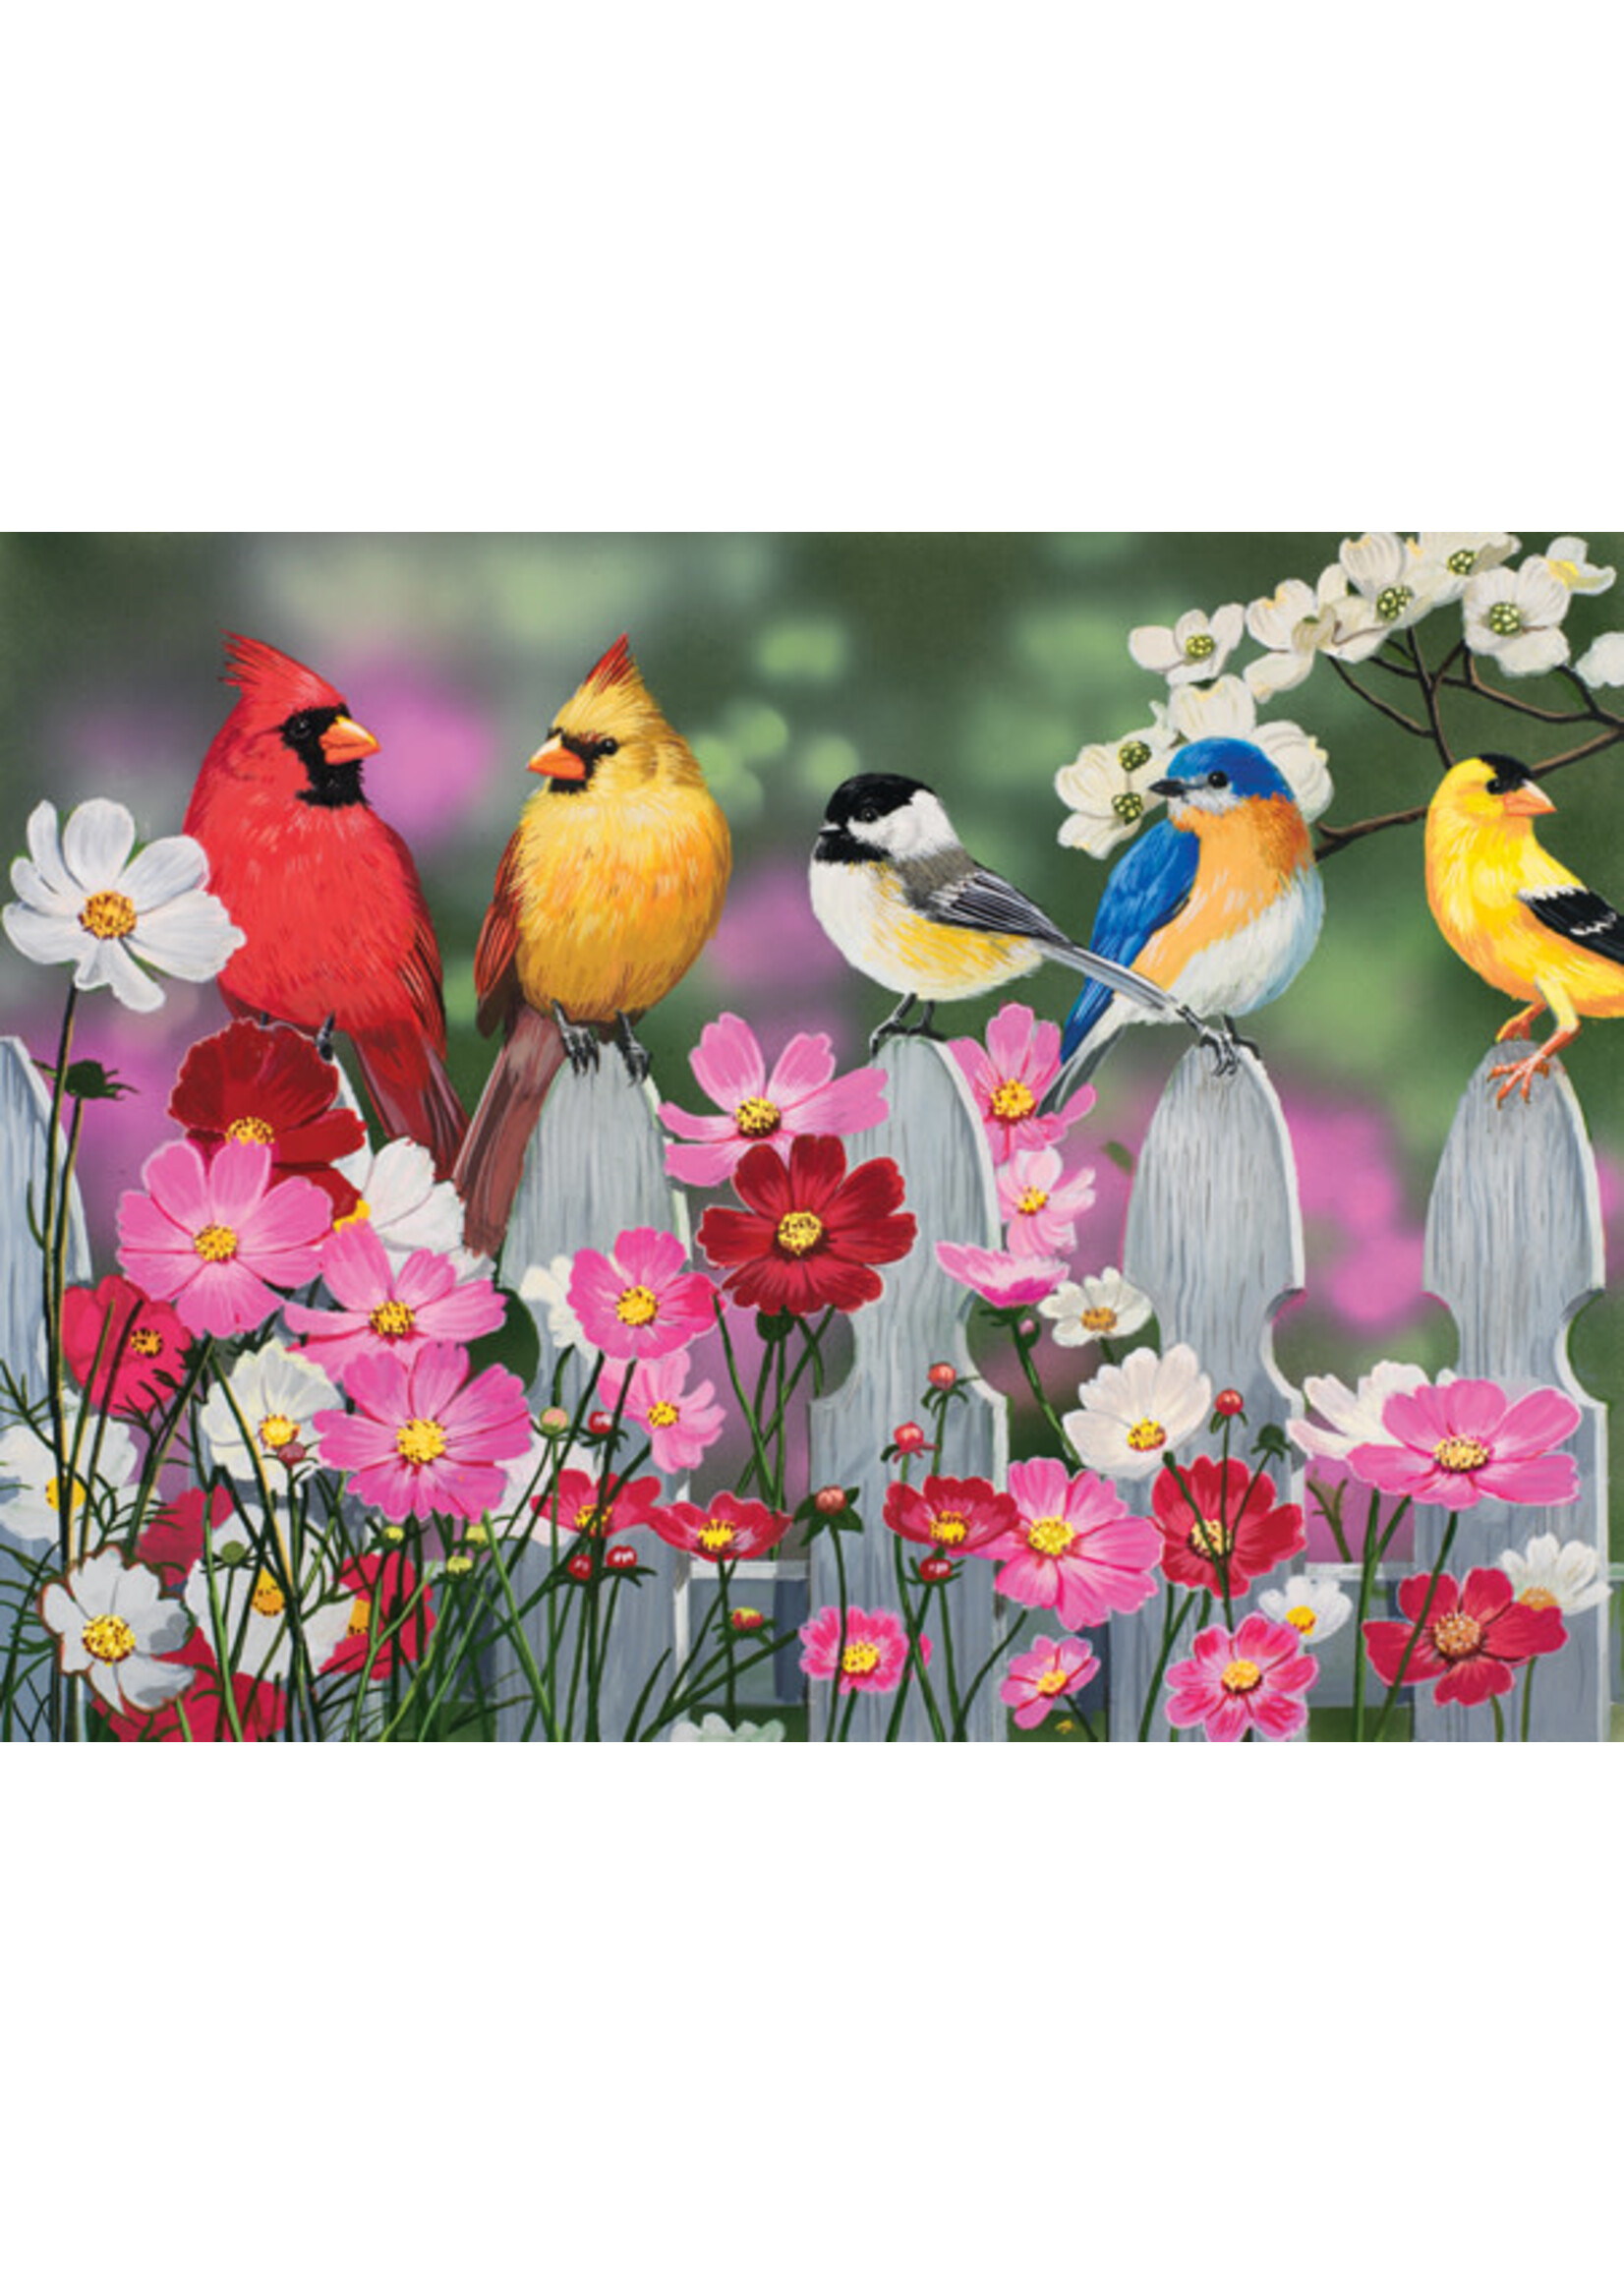 Sunsout Songbirds and Cosmos Puzzle 500 Pieces